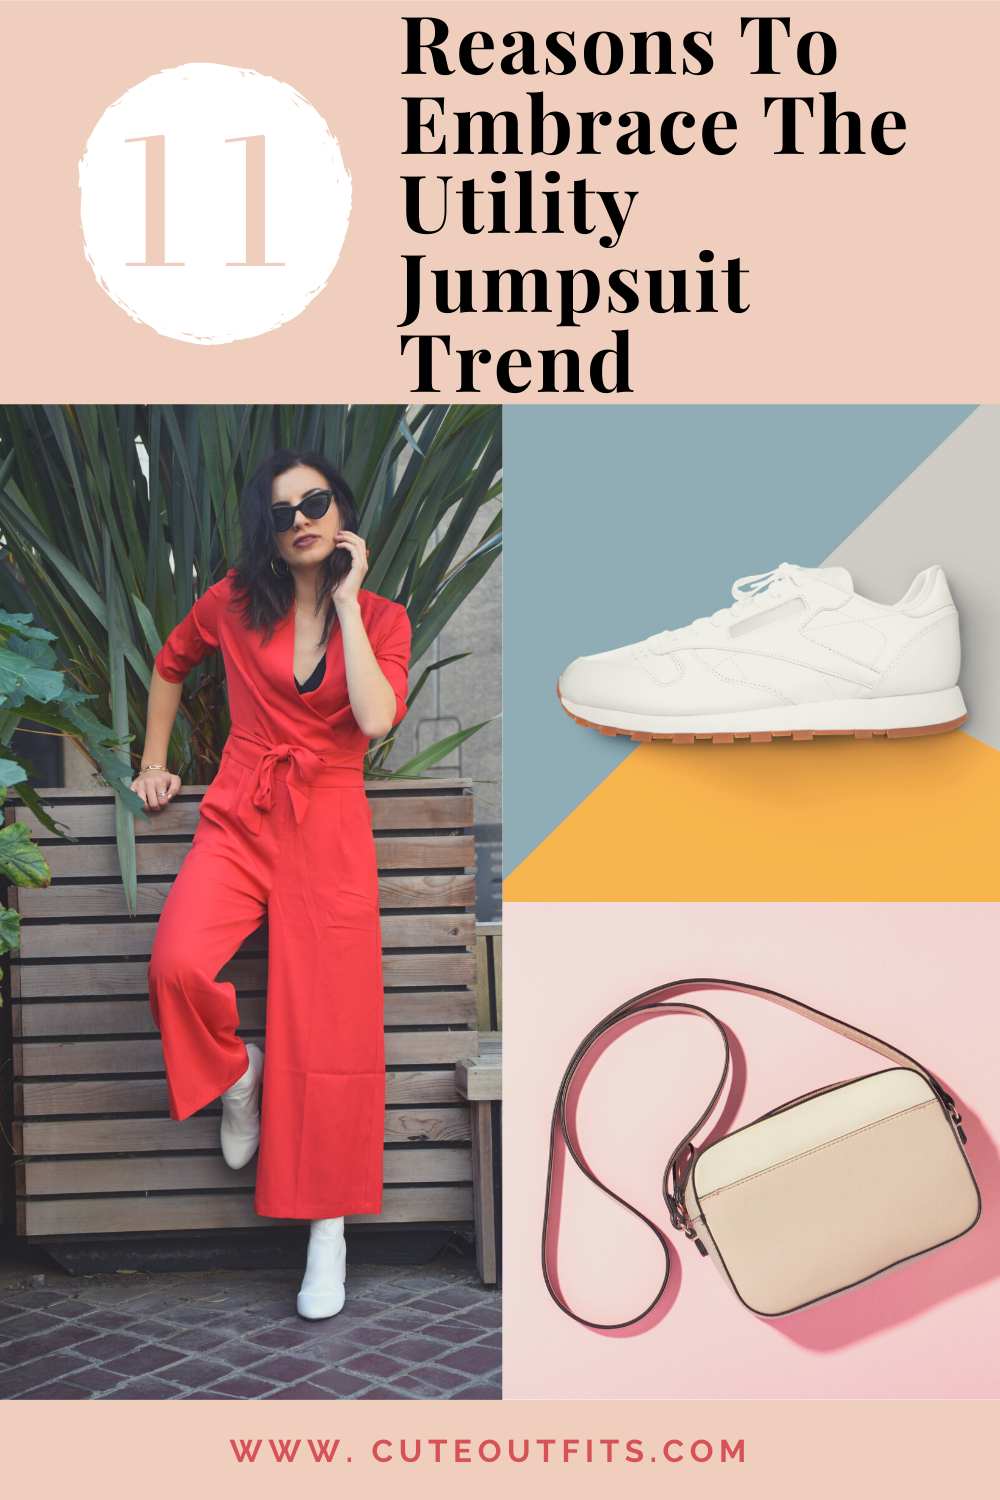 placard | 11 Reasons To Embrace The Utility Jumpsuit Trend